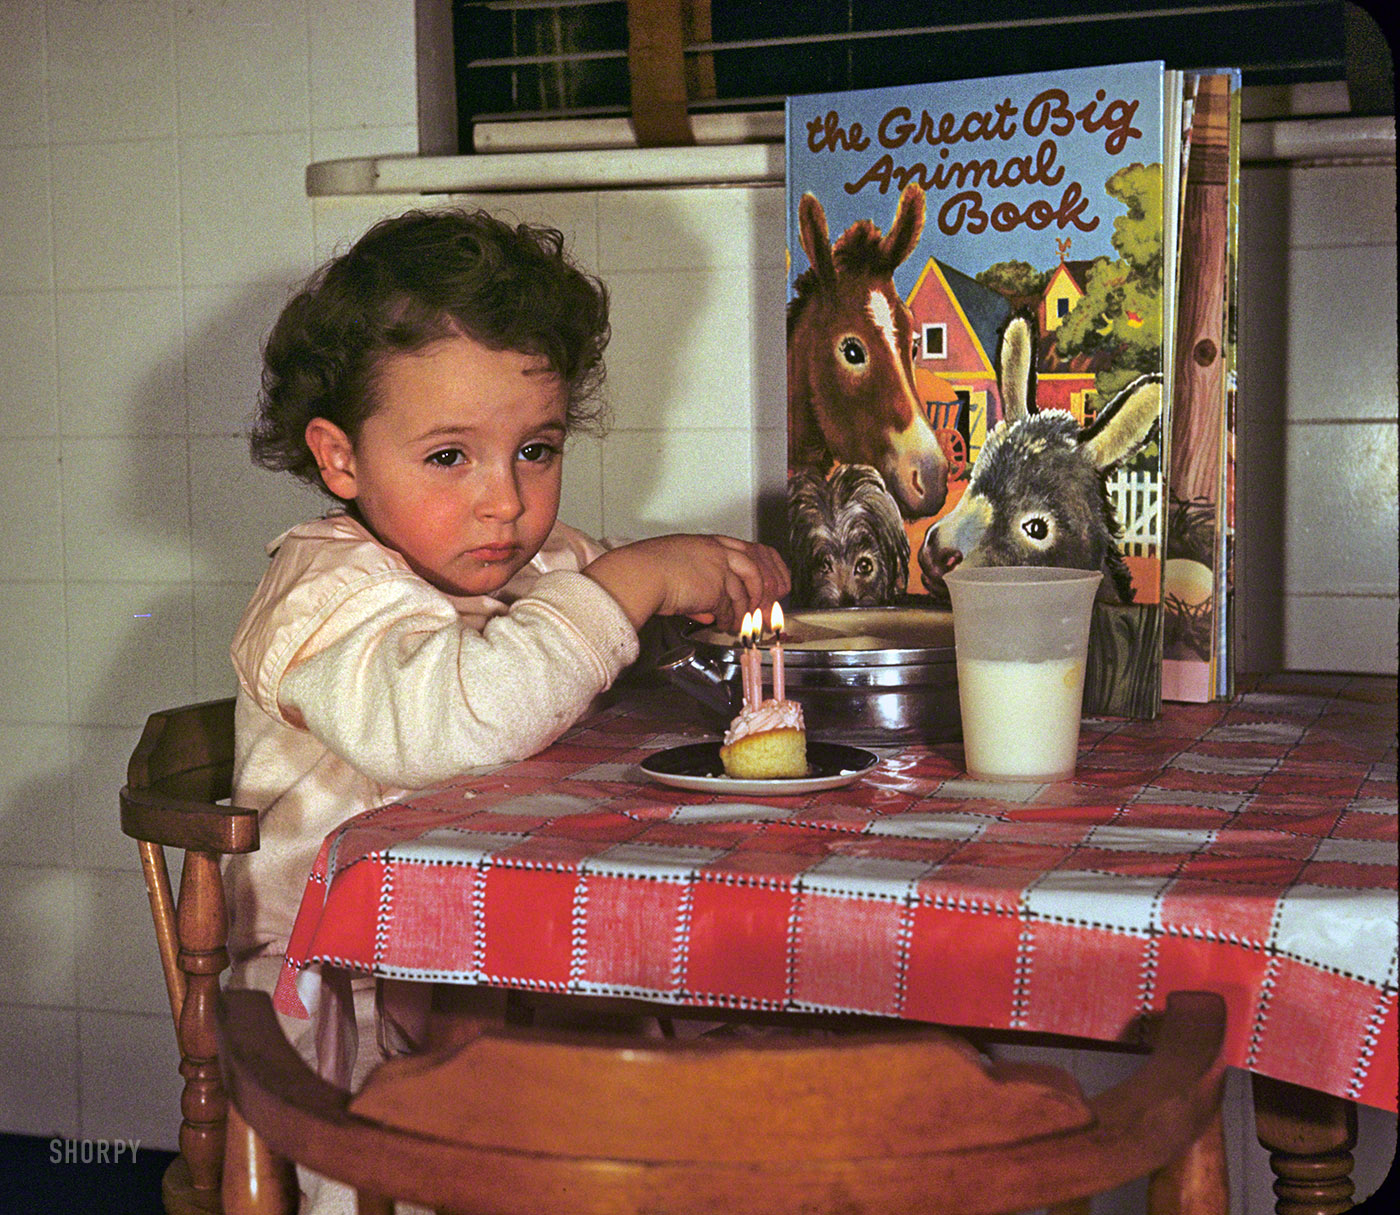 "Linda's third birthday -- 1950." Our second visit with Linda, who despite being only 3 already seems a little jaded. 35mm Kodachrome. View full size.